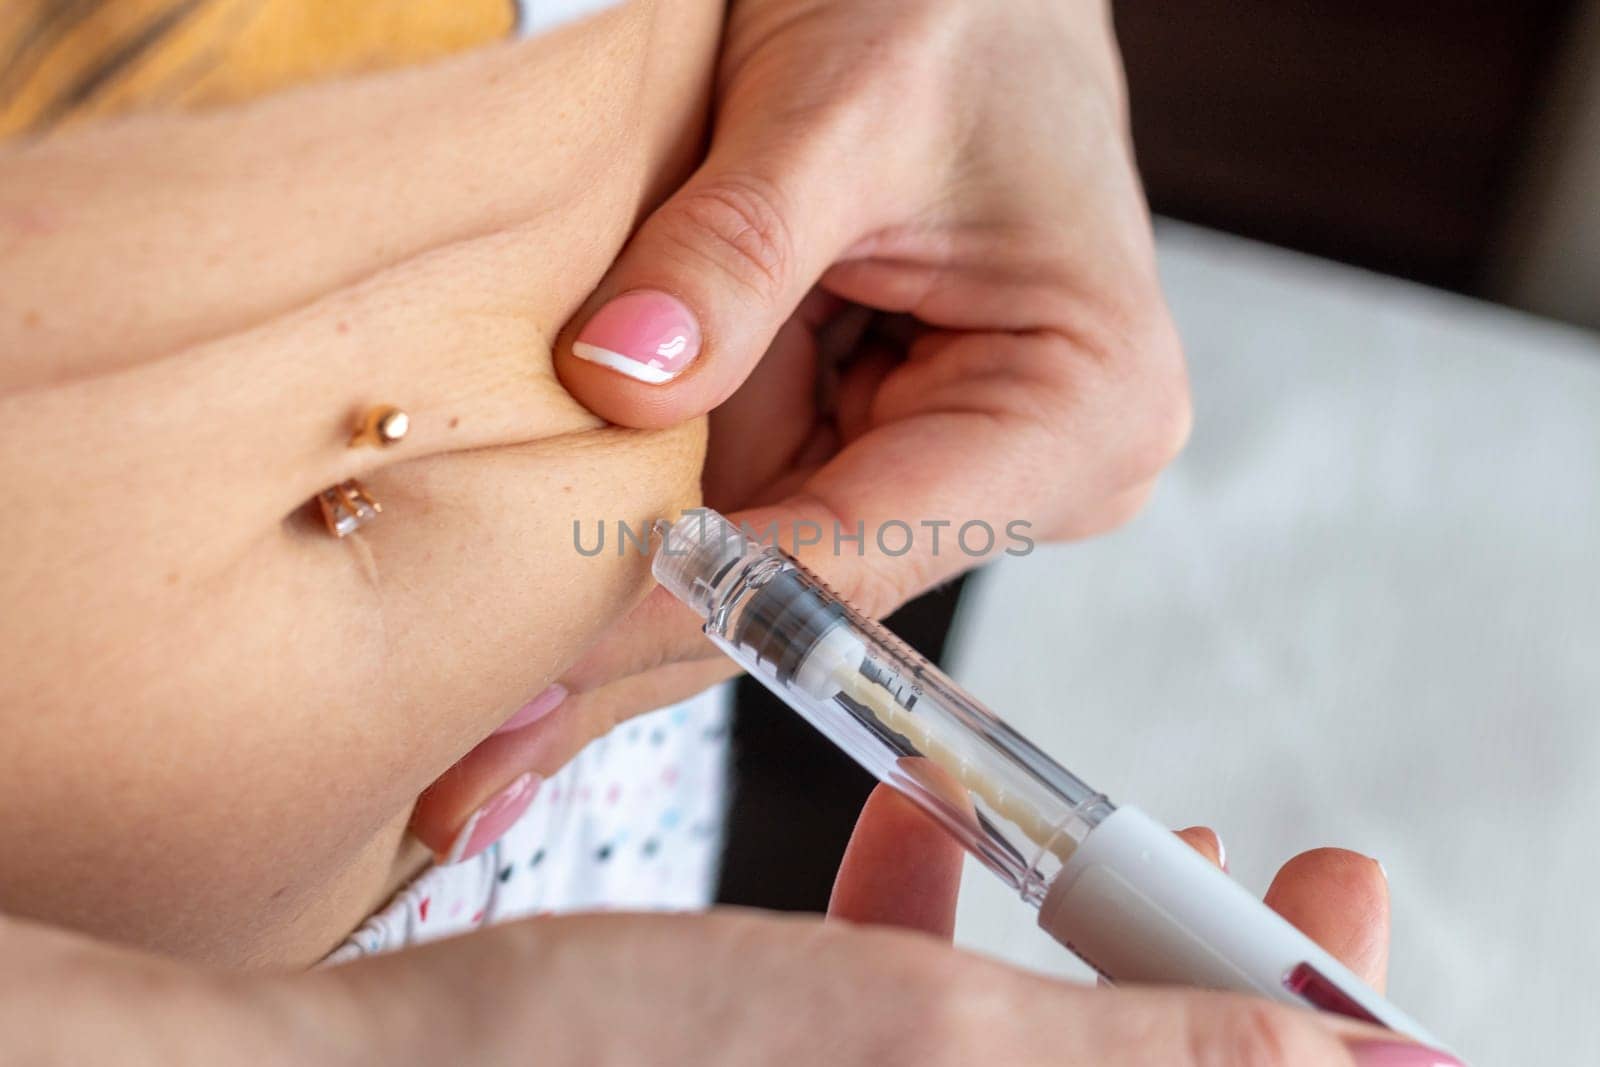 Close up shot of the woman with beautiful hands, preparing hormone medicine and injecting herself to the abdomen with pierced bellybutton.